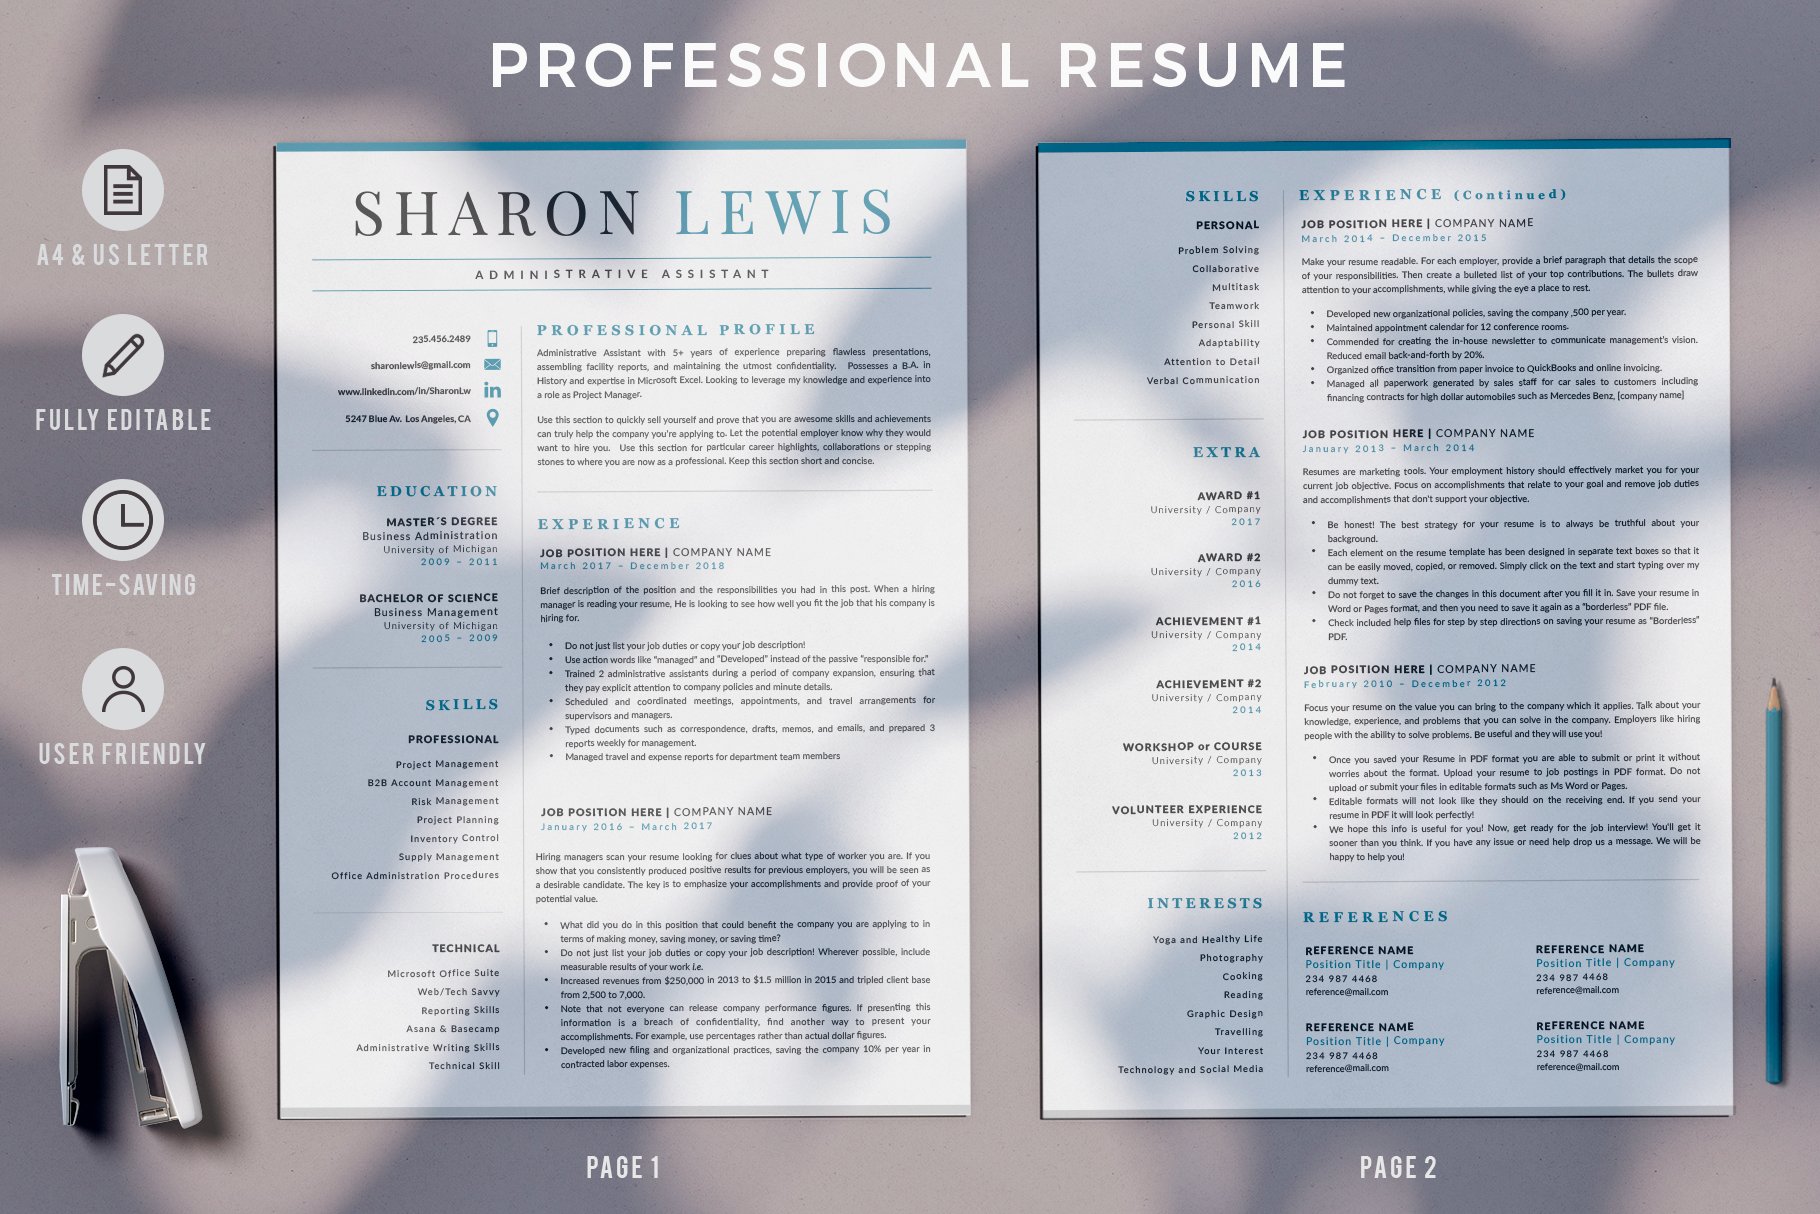 Professional Resume Format Example preview image.